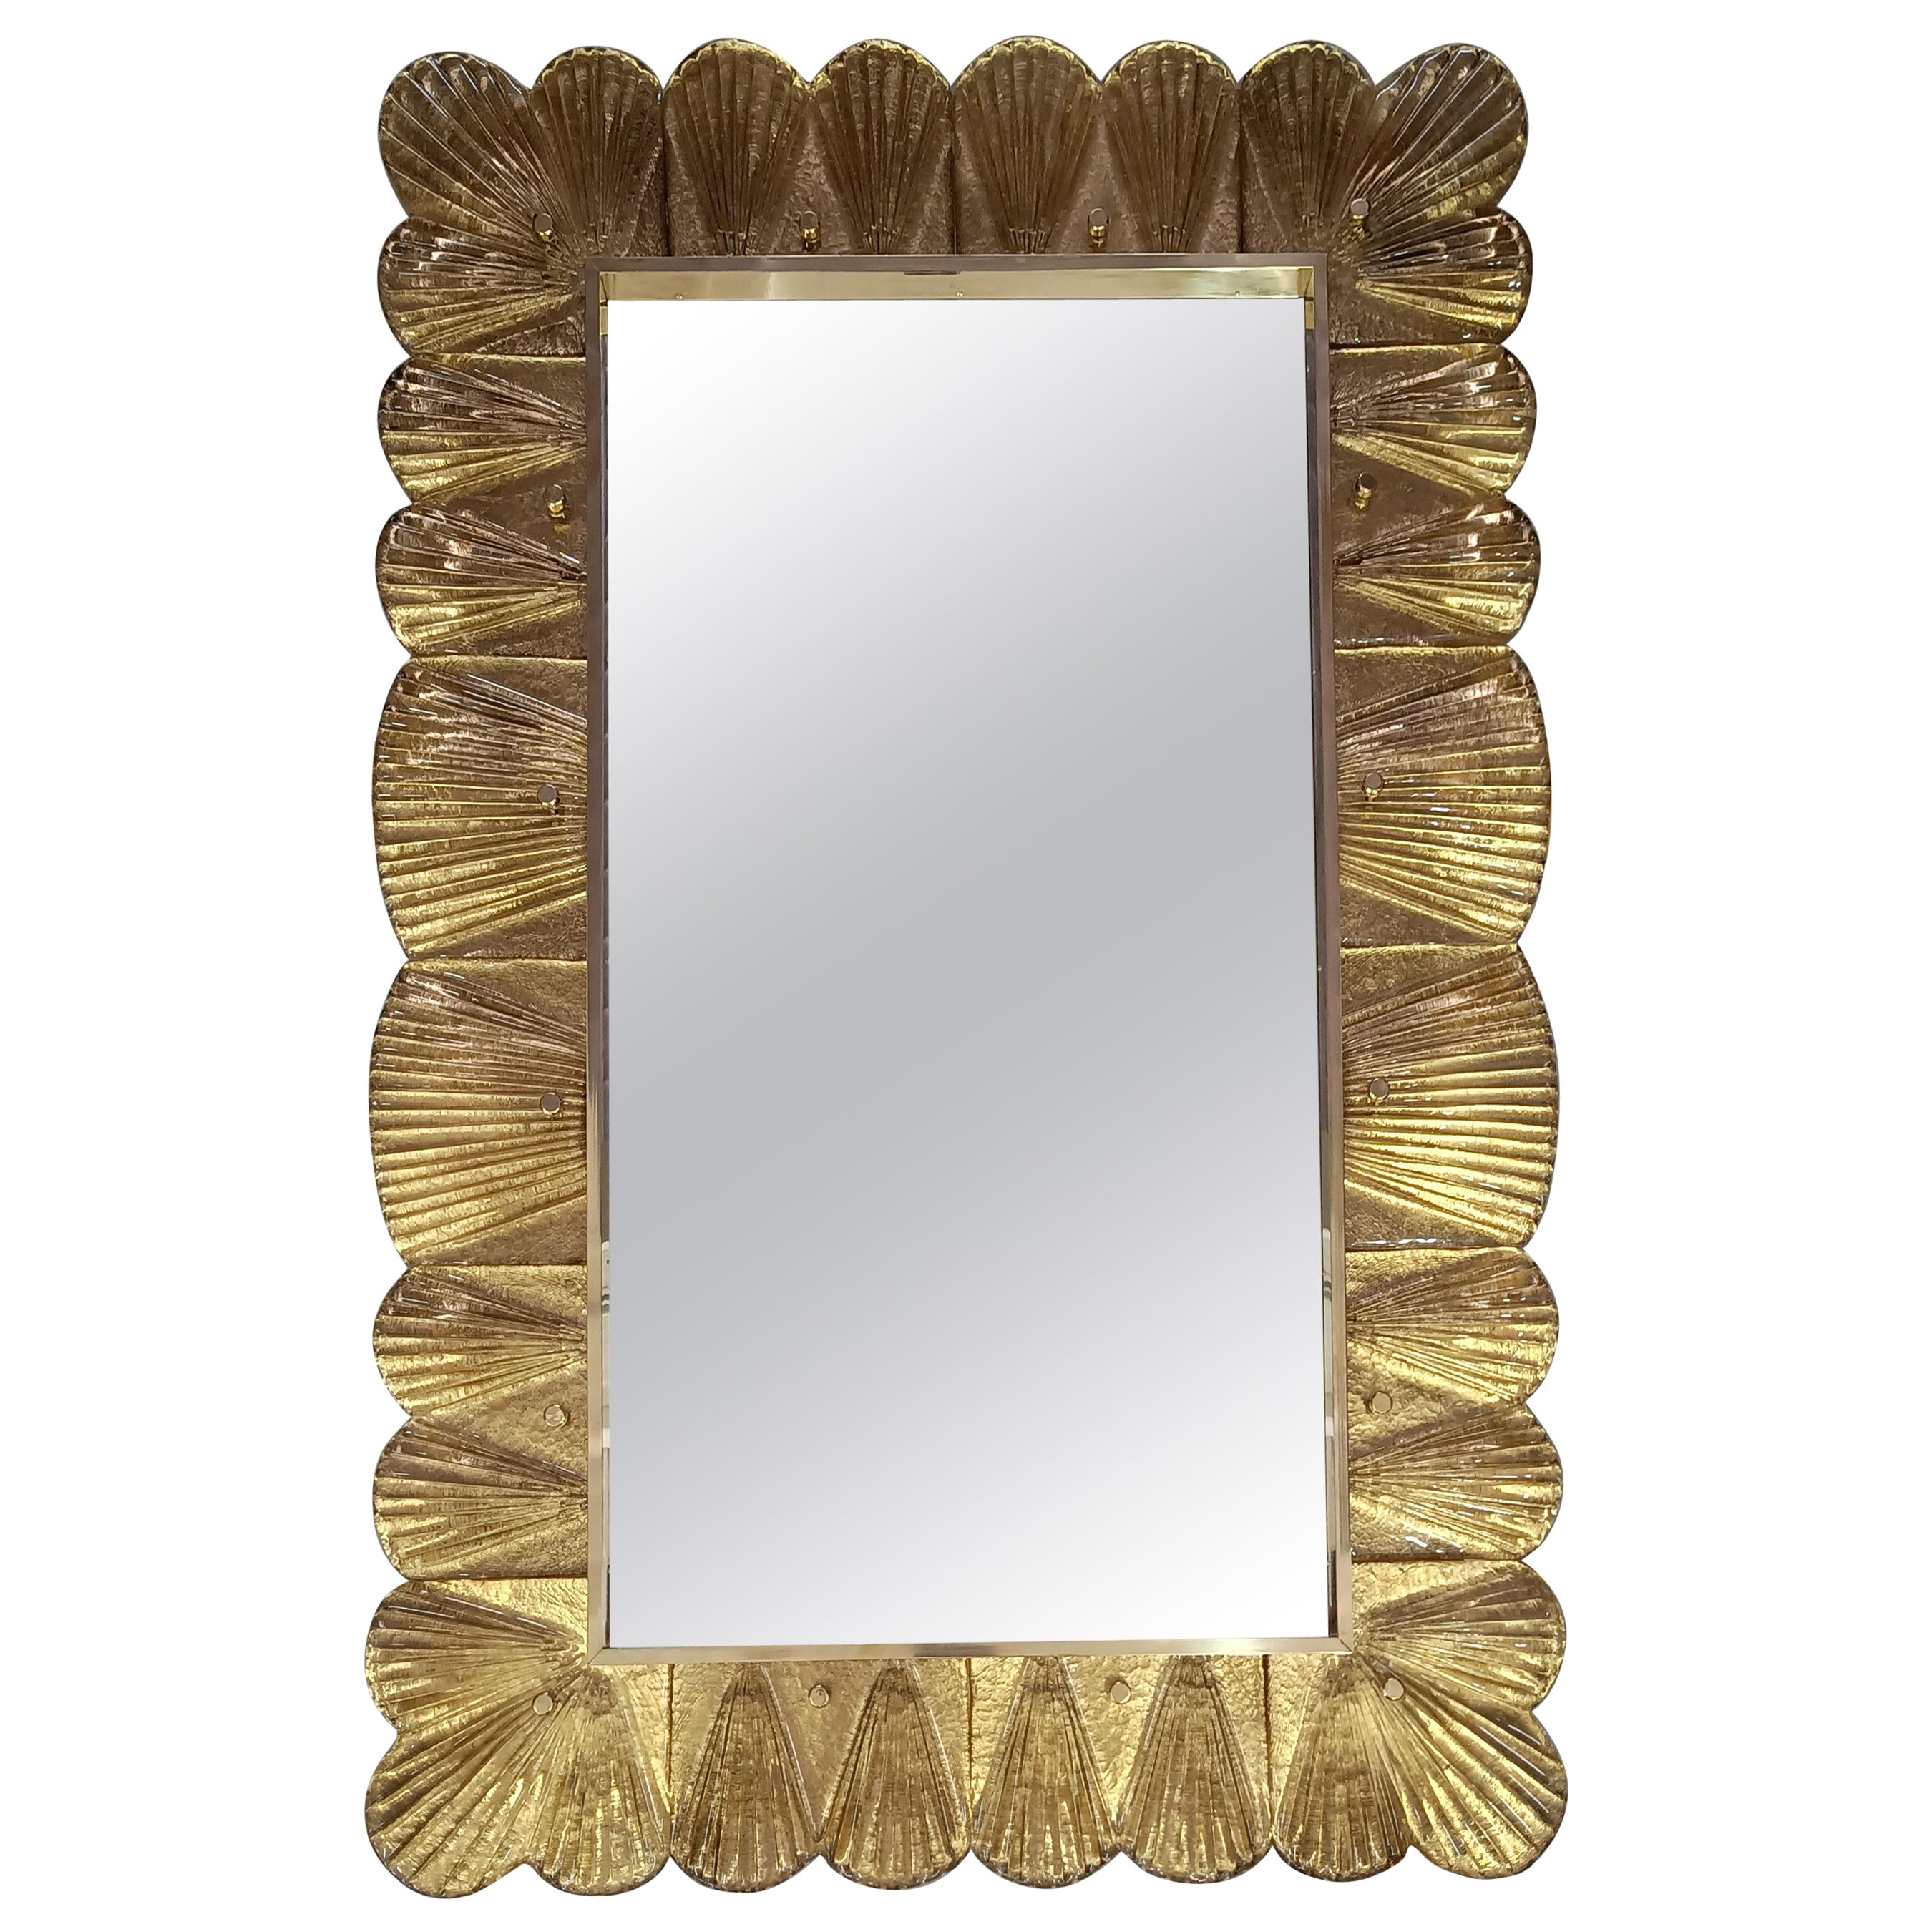 Murano Gold Color Glass and Brass Mid-Century Wall Mirror, 2000